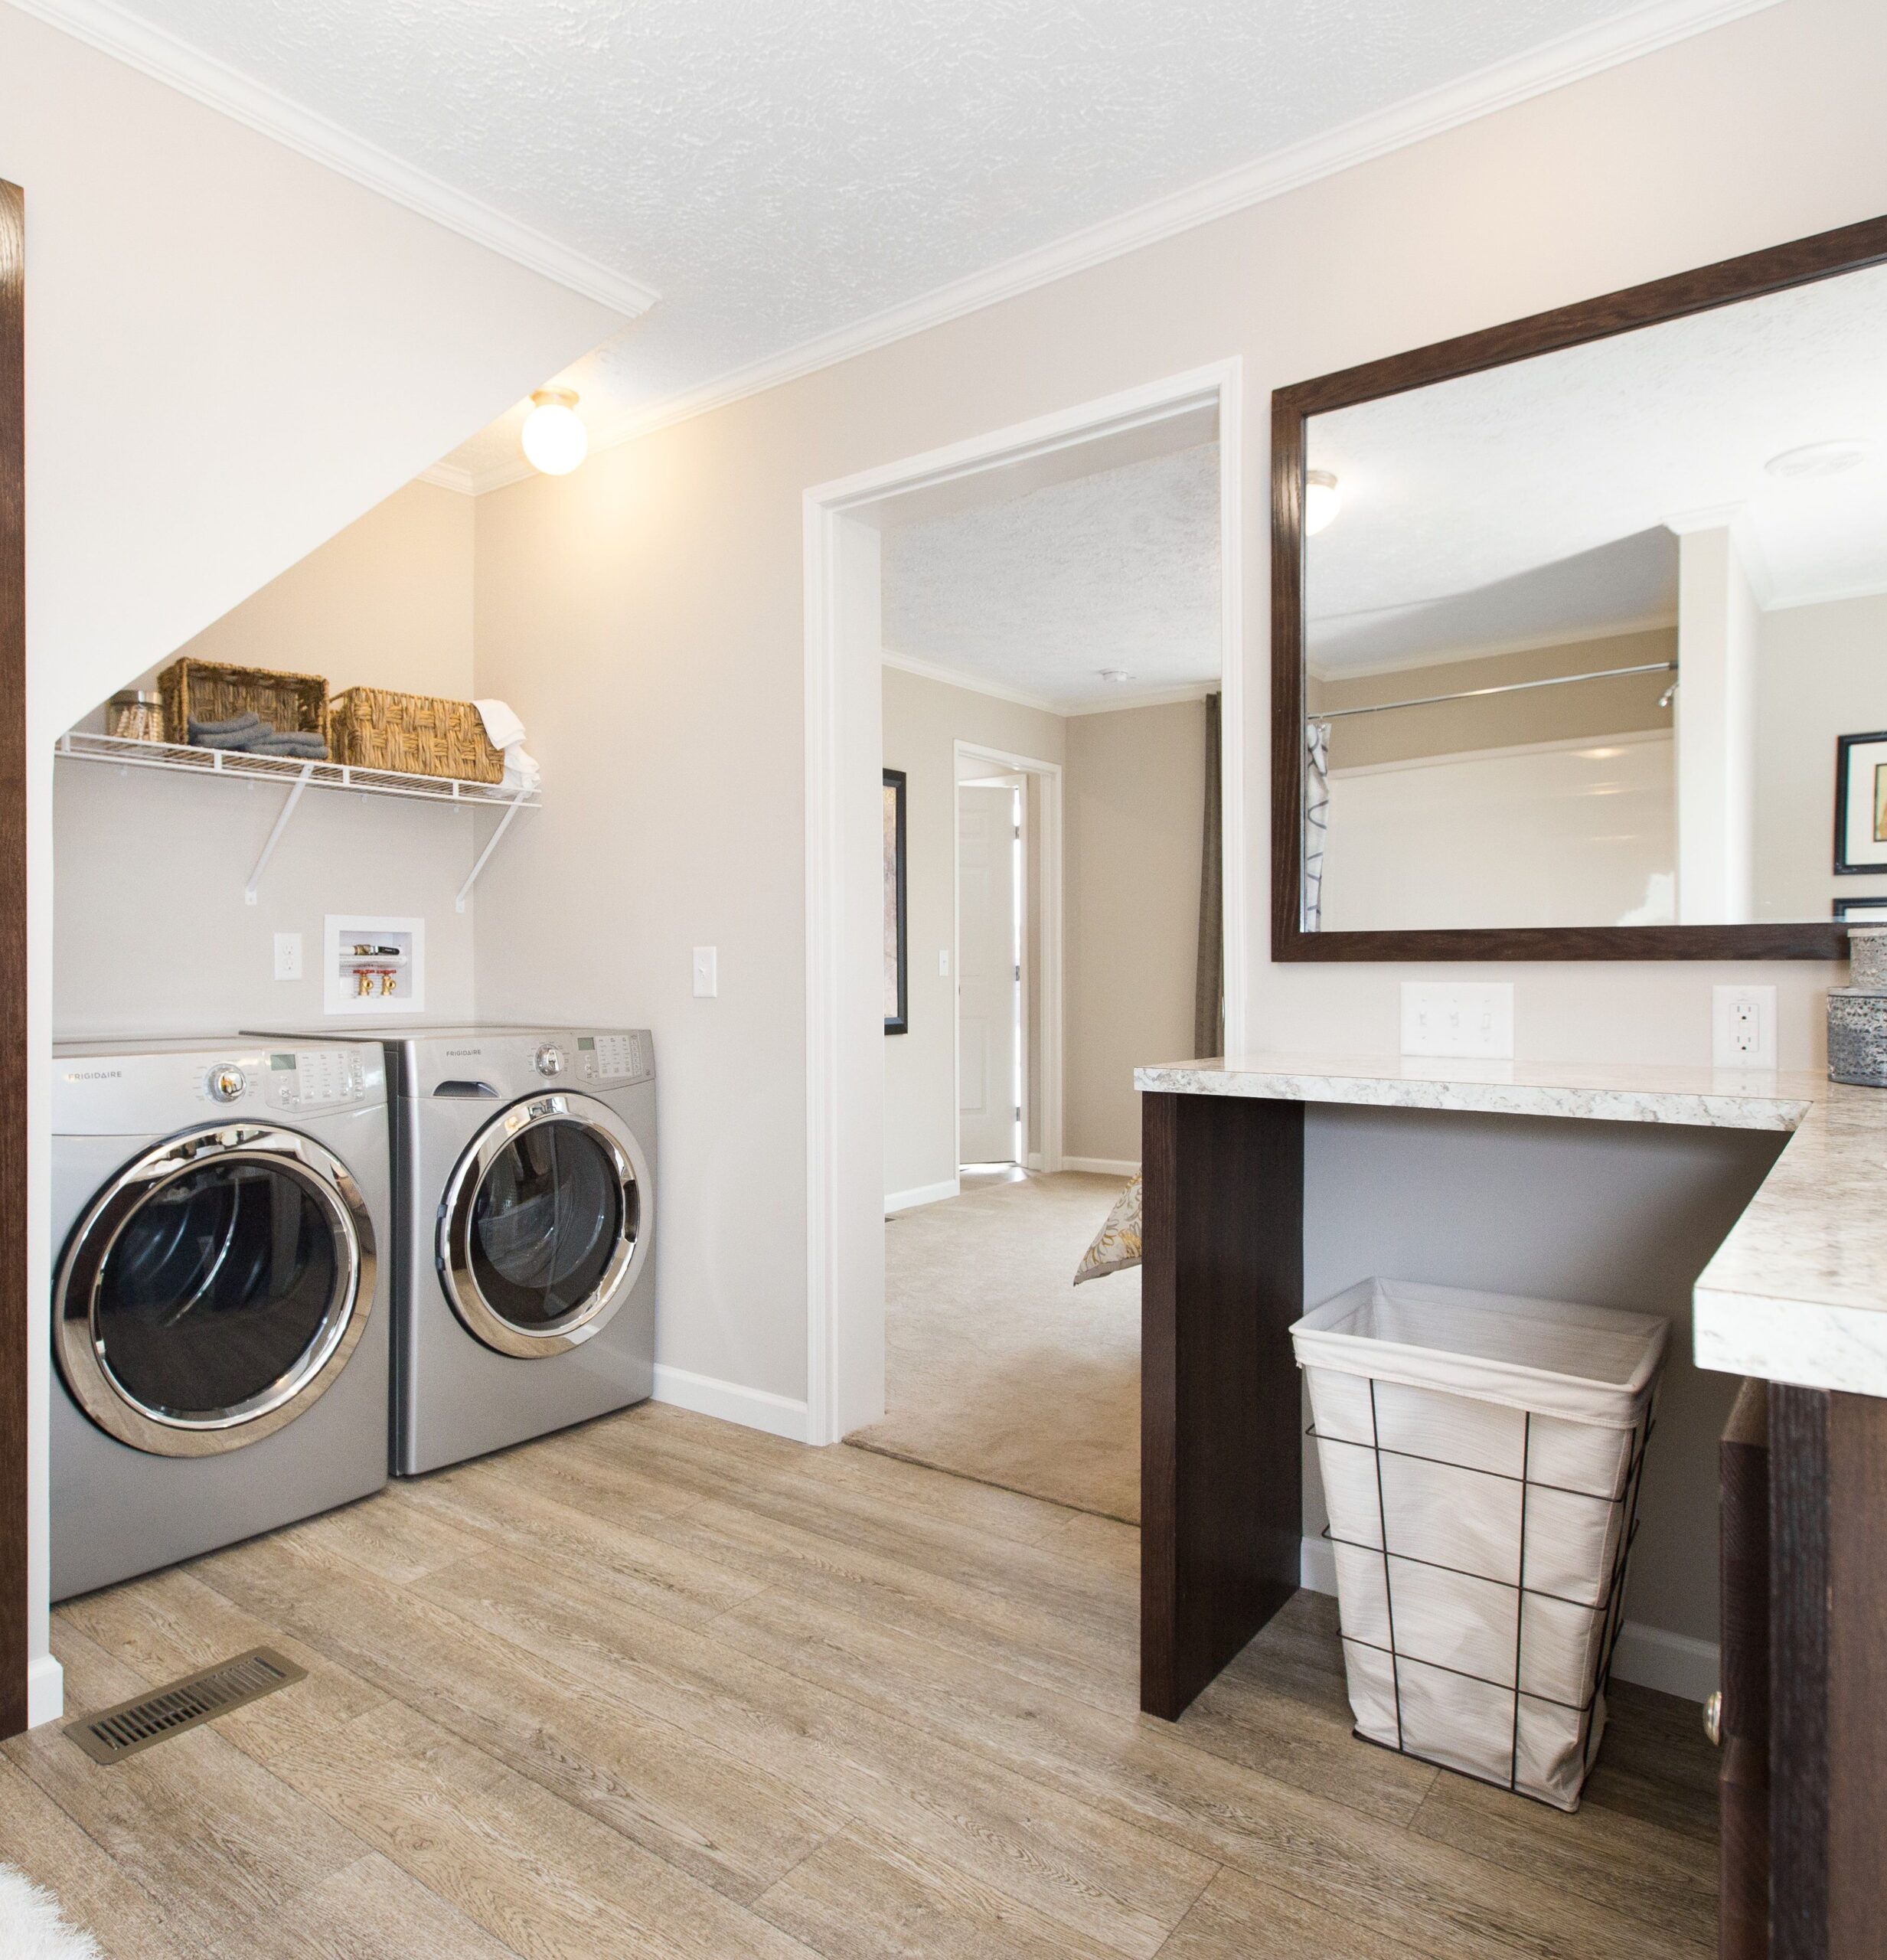 Here's How to Create a Well-Organized Laundry Room - Live Enhanced